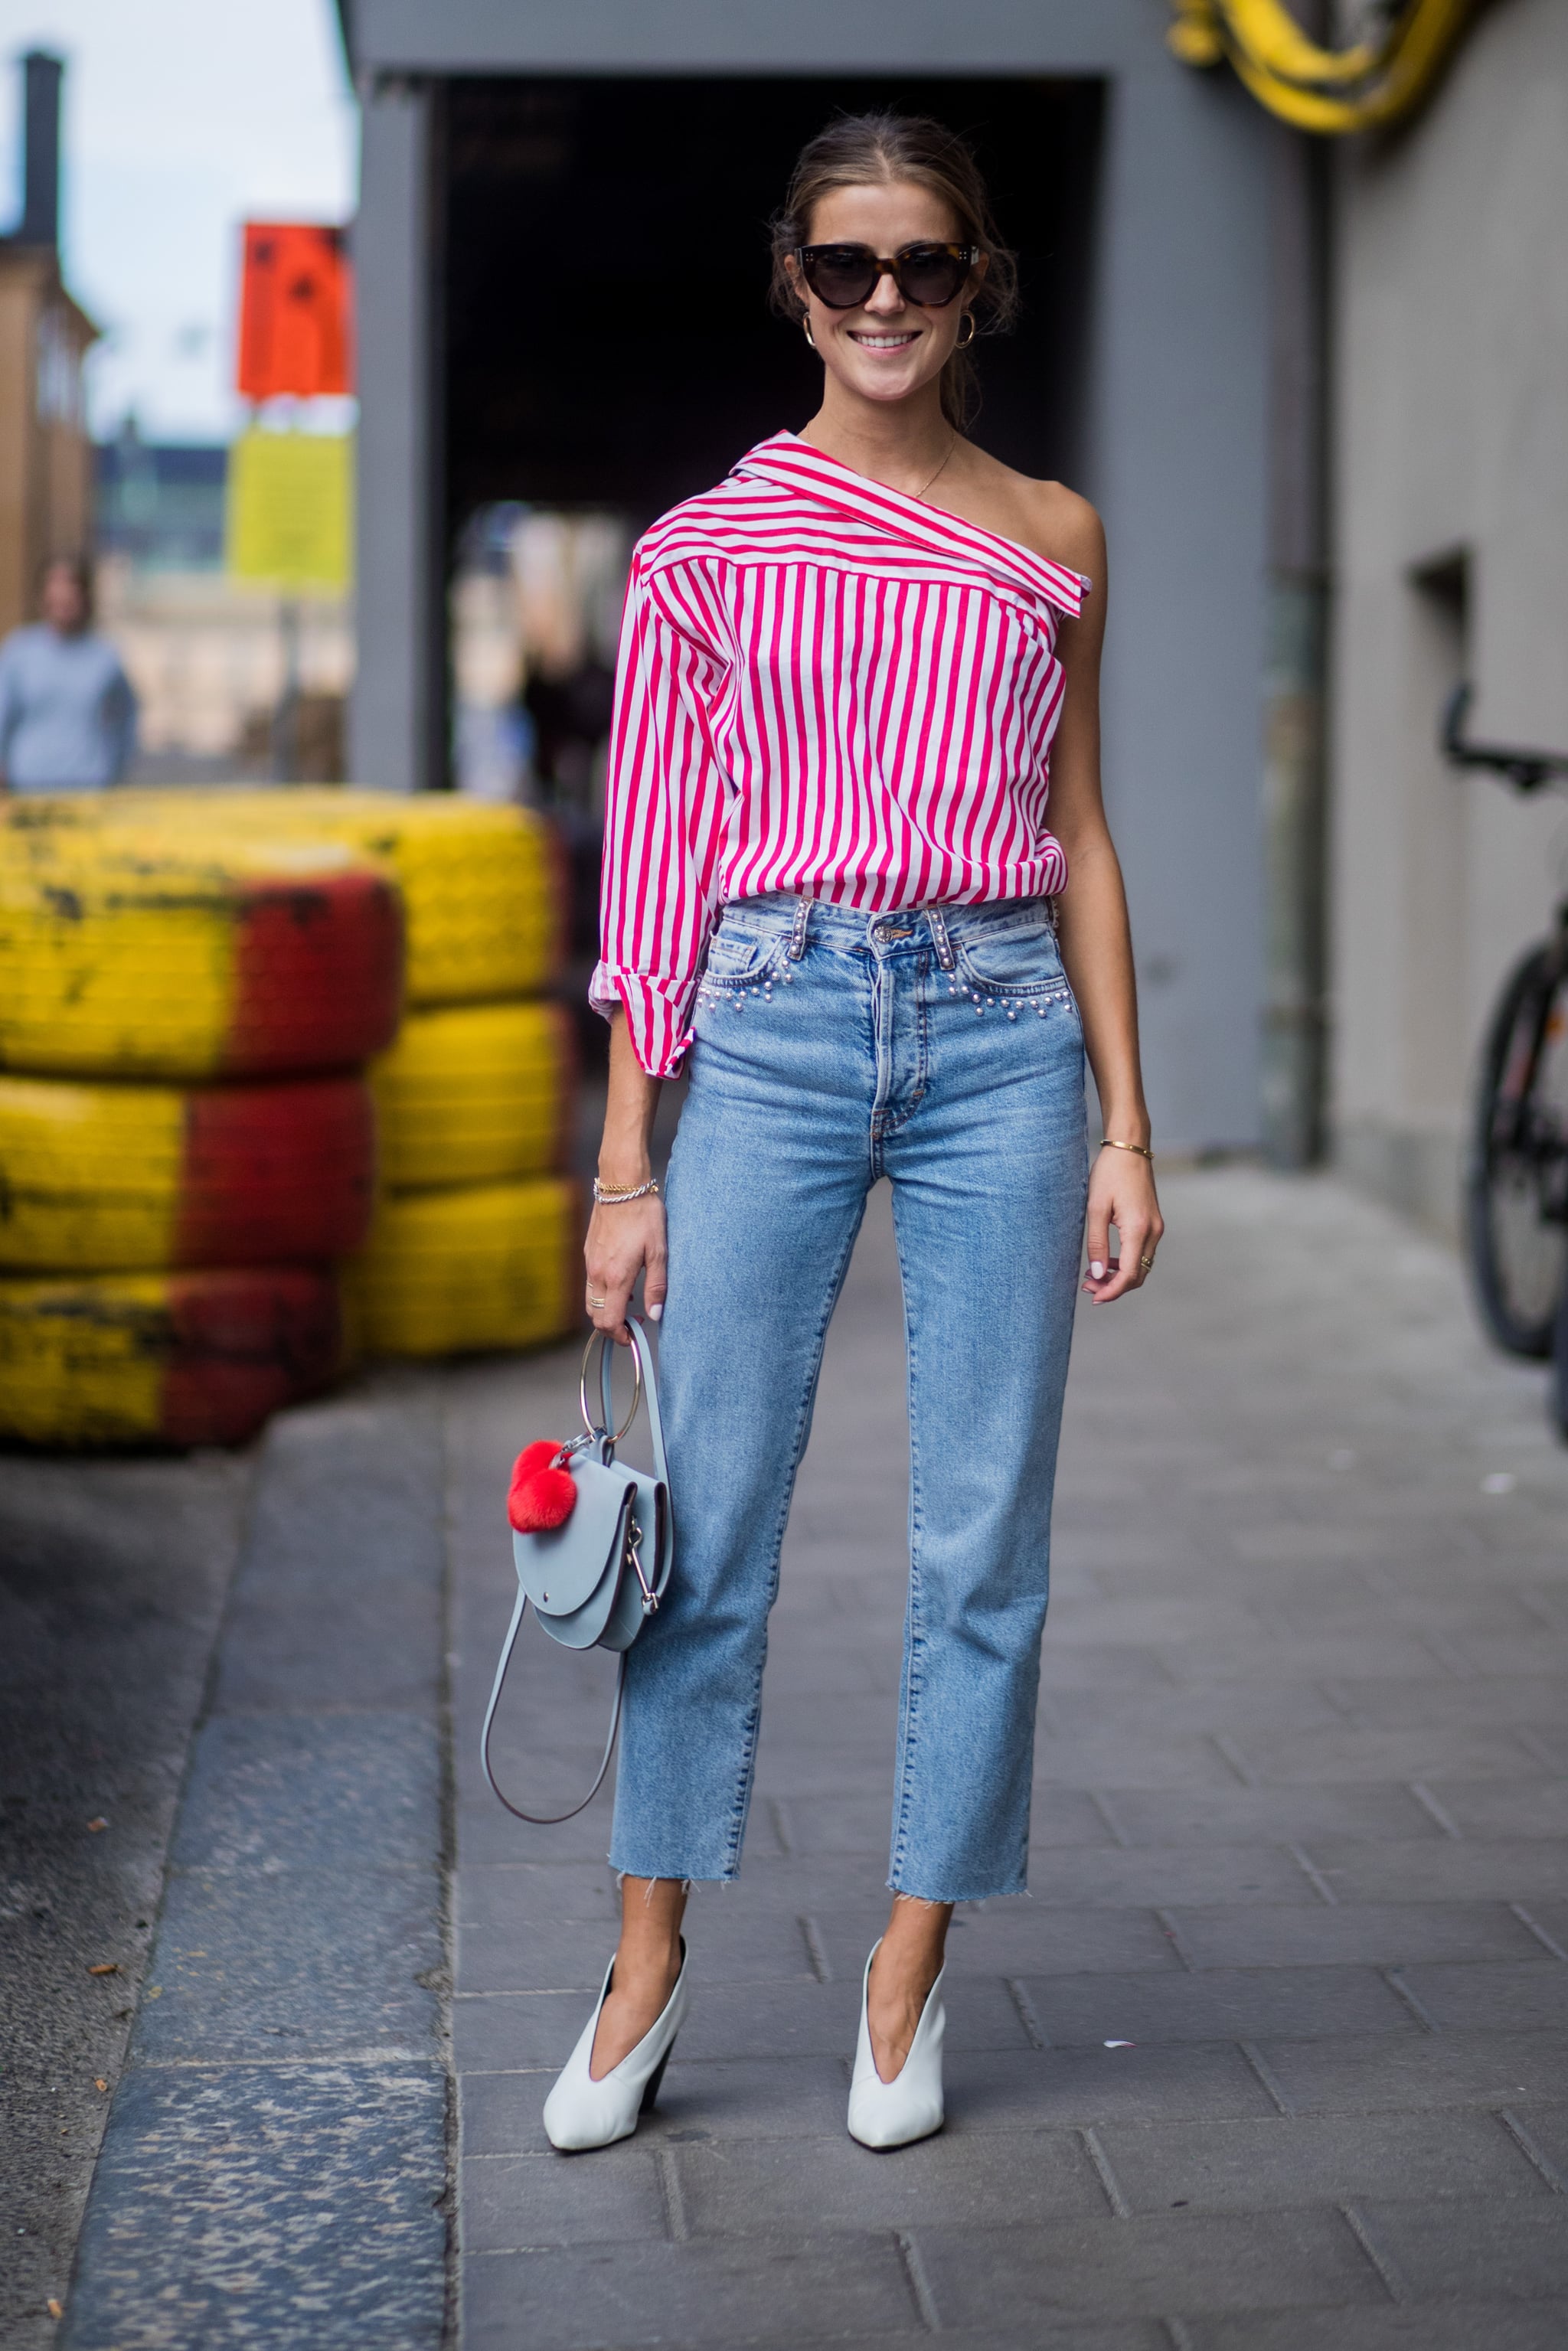 current jeans trends 2019